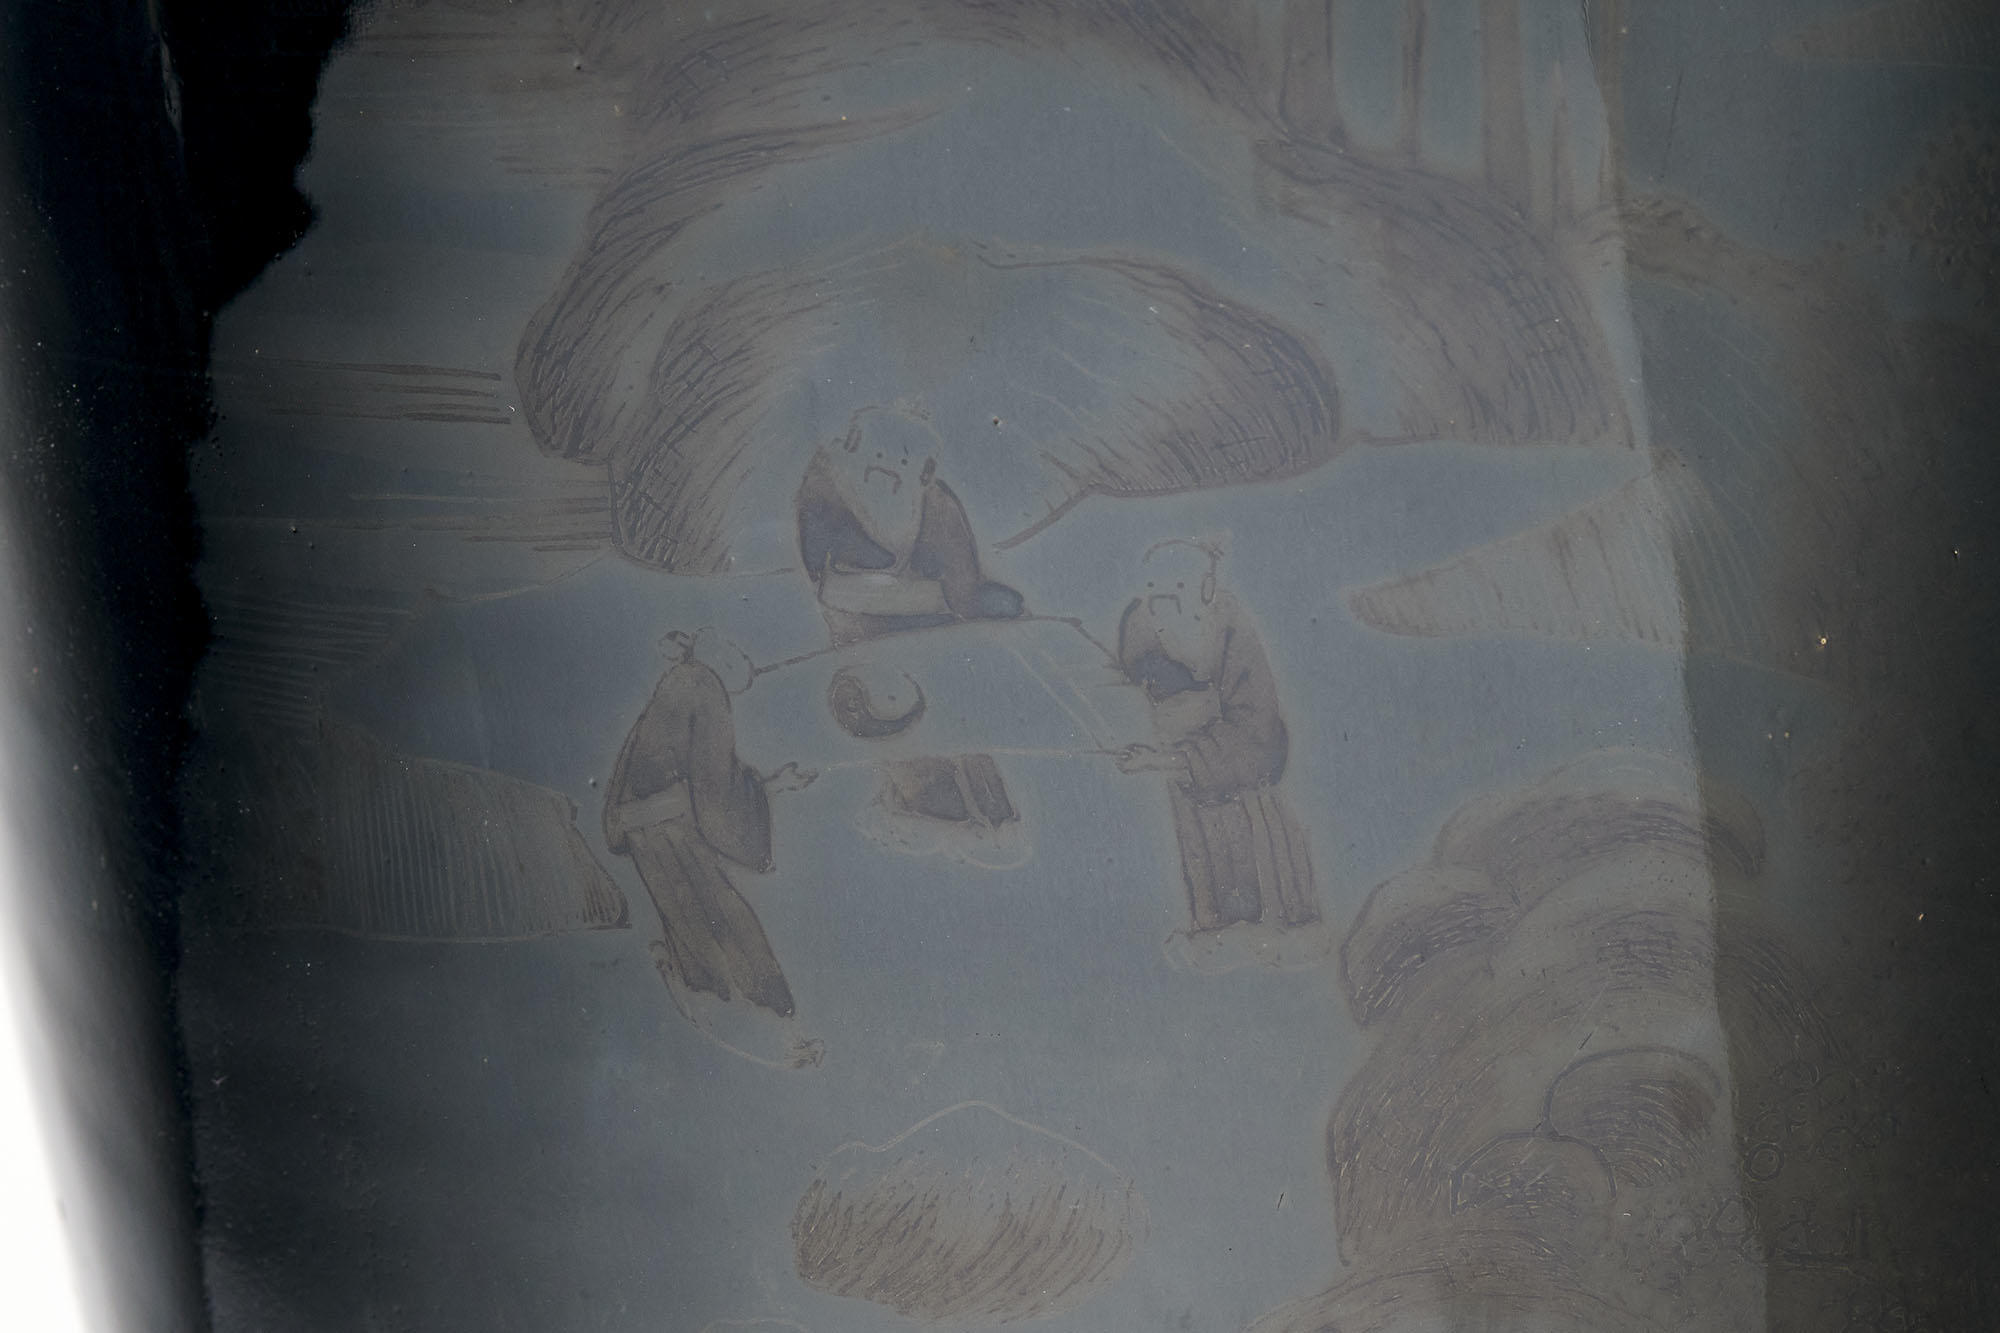 Detail of trace decoration showing three male figures in robes standing outside surrounded by textured rocks. Two hold a scroll bearing the yin and yang symbol. The third figure looks down at the scroll.